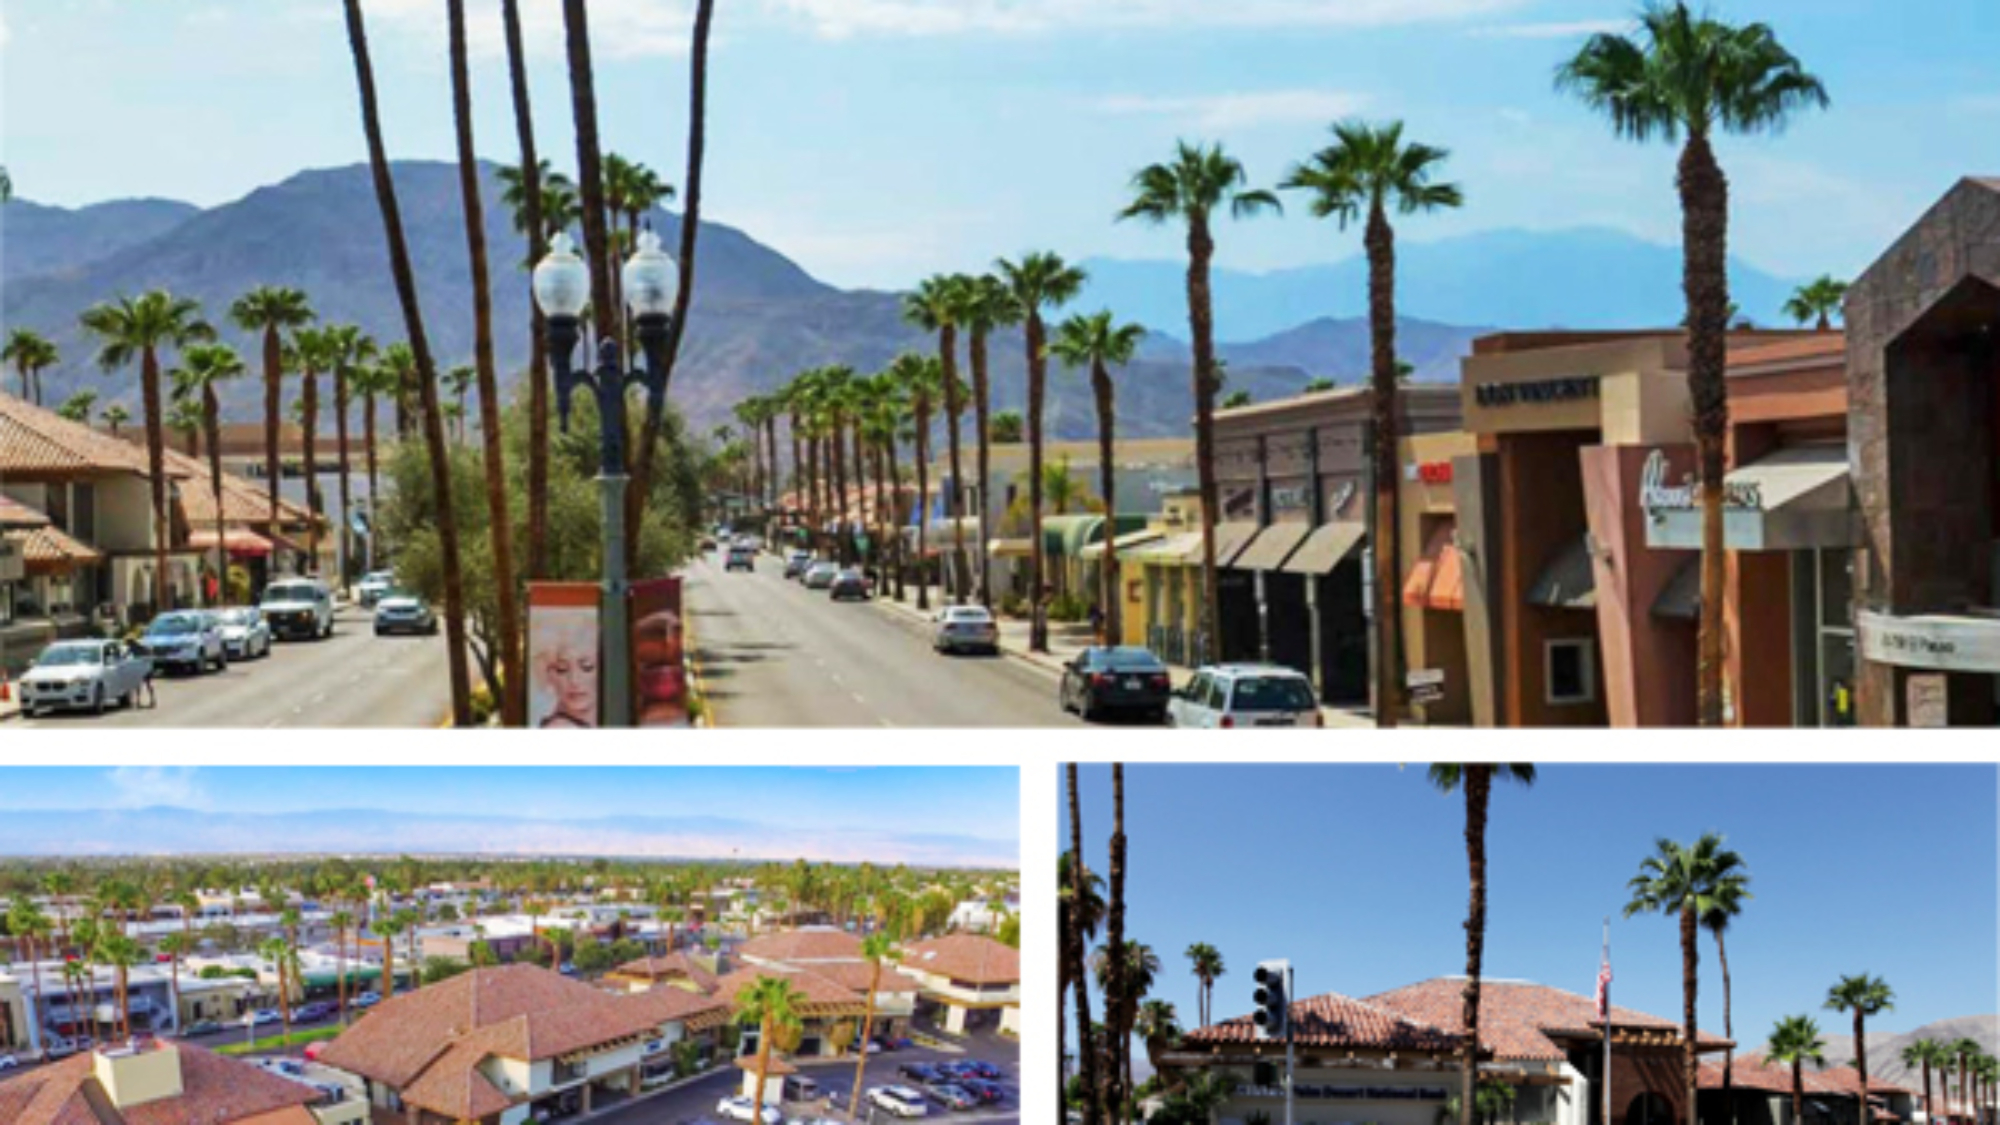 El Paseo Dining Tour of Palm Desert's The Shops on El Paseo